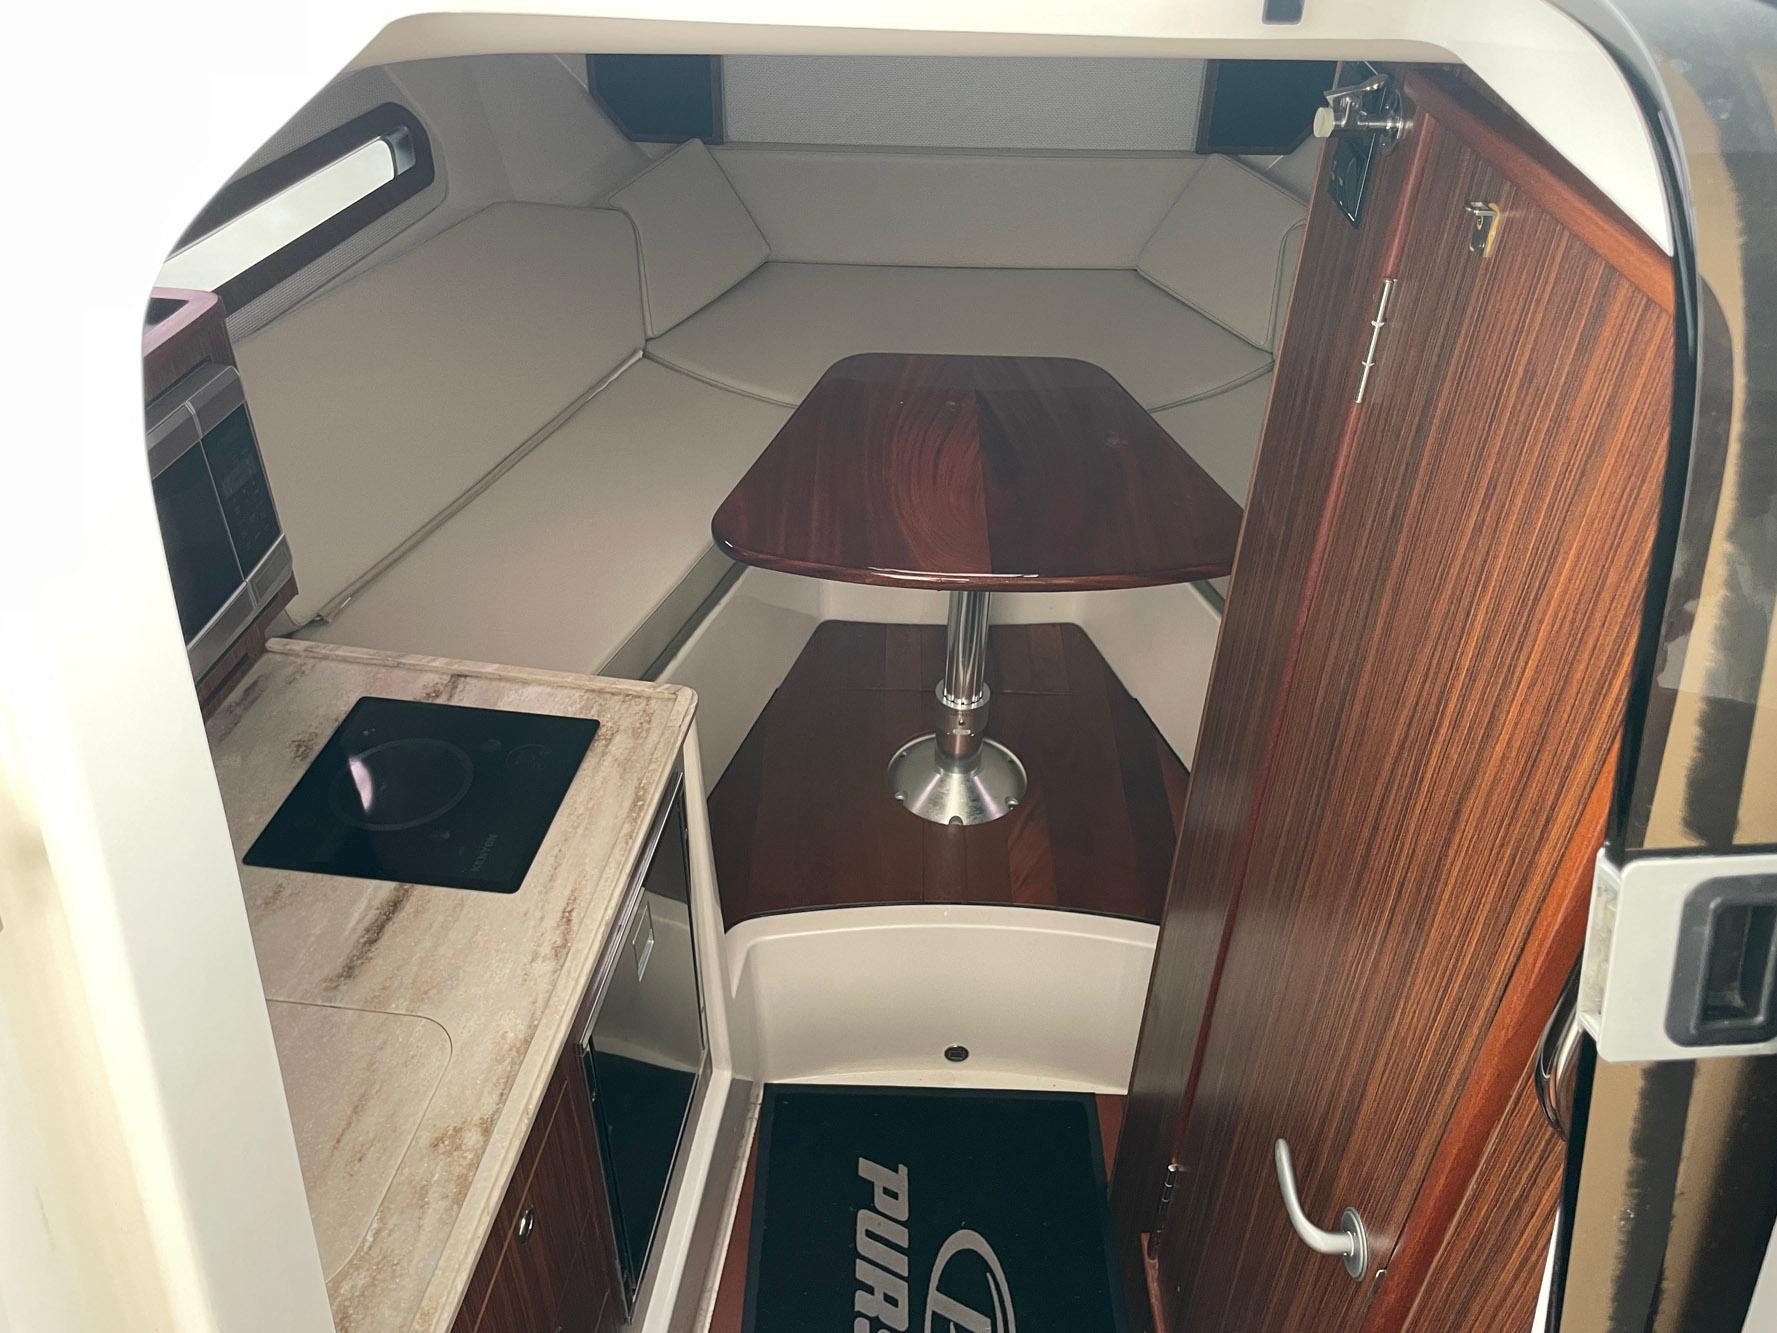 2019 Pursuit OS 325 Offshore Saltwater Fishing for sale - YachtWorld